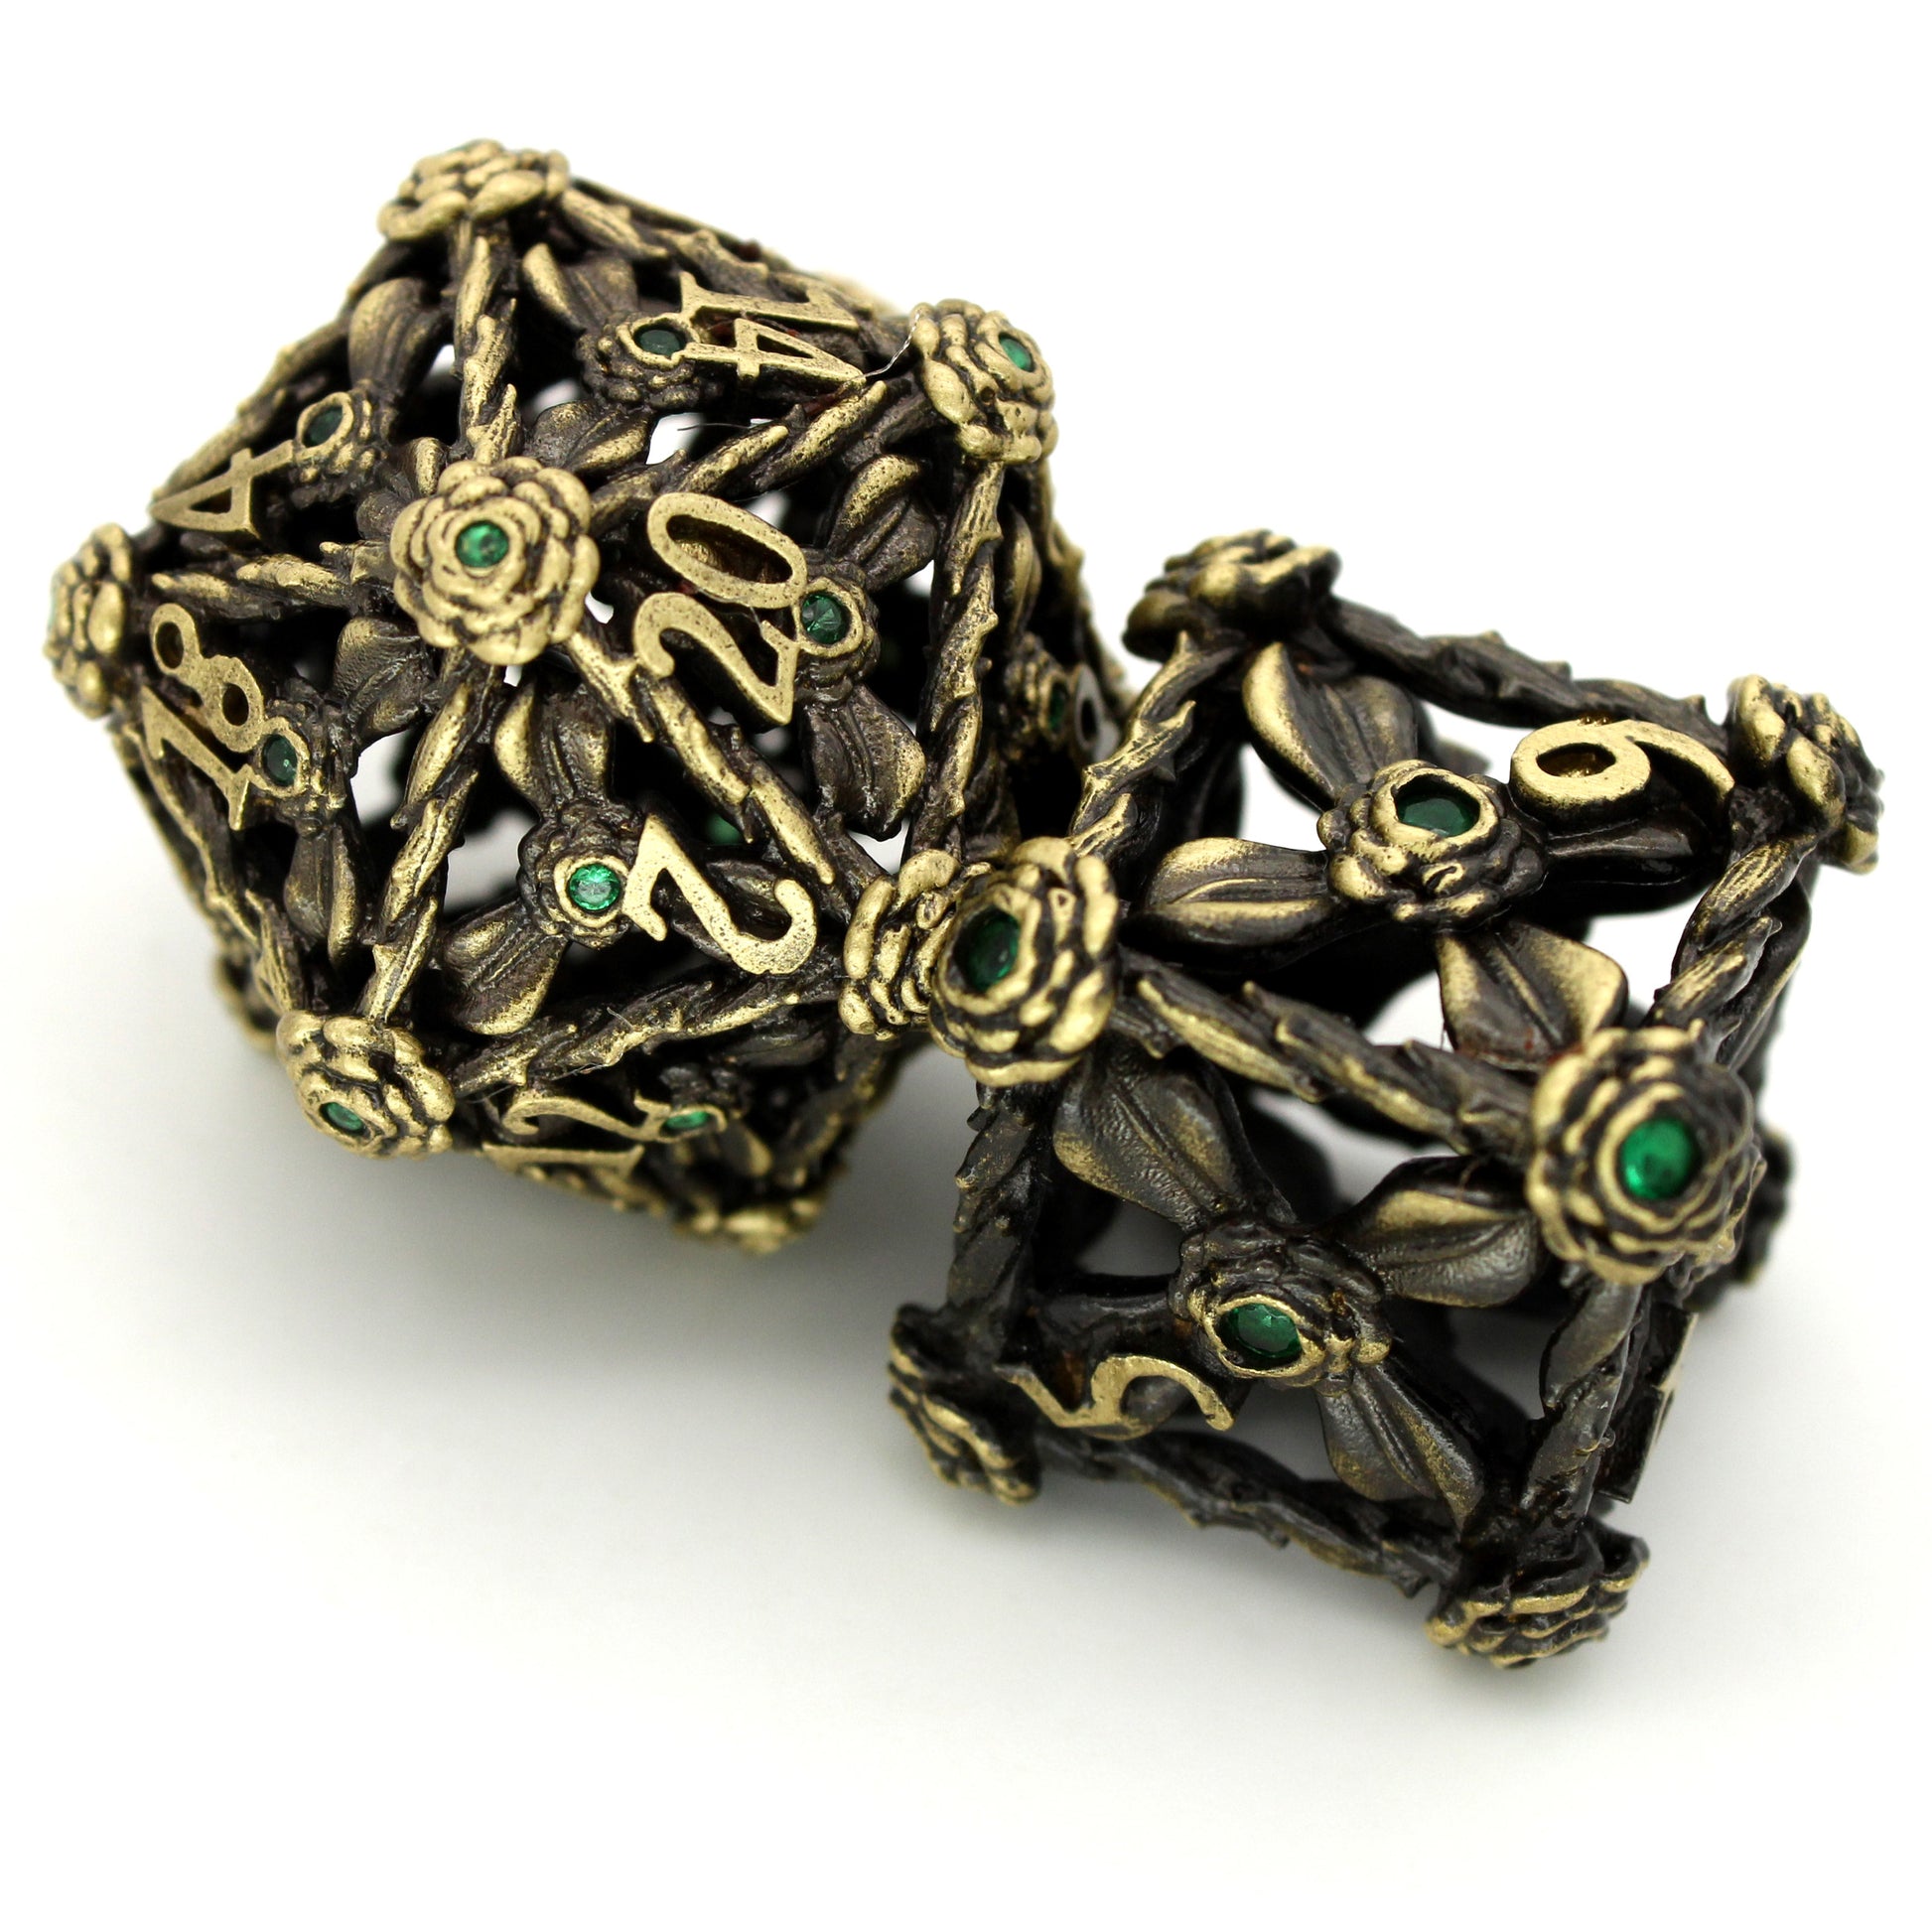 Wither and Bloom is a 7-piece set of hollow brass dice featuring flowers, vines, and tiny green gems.